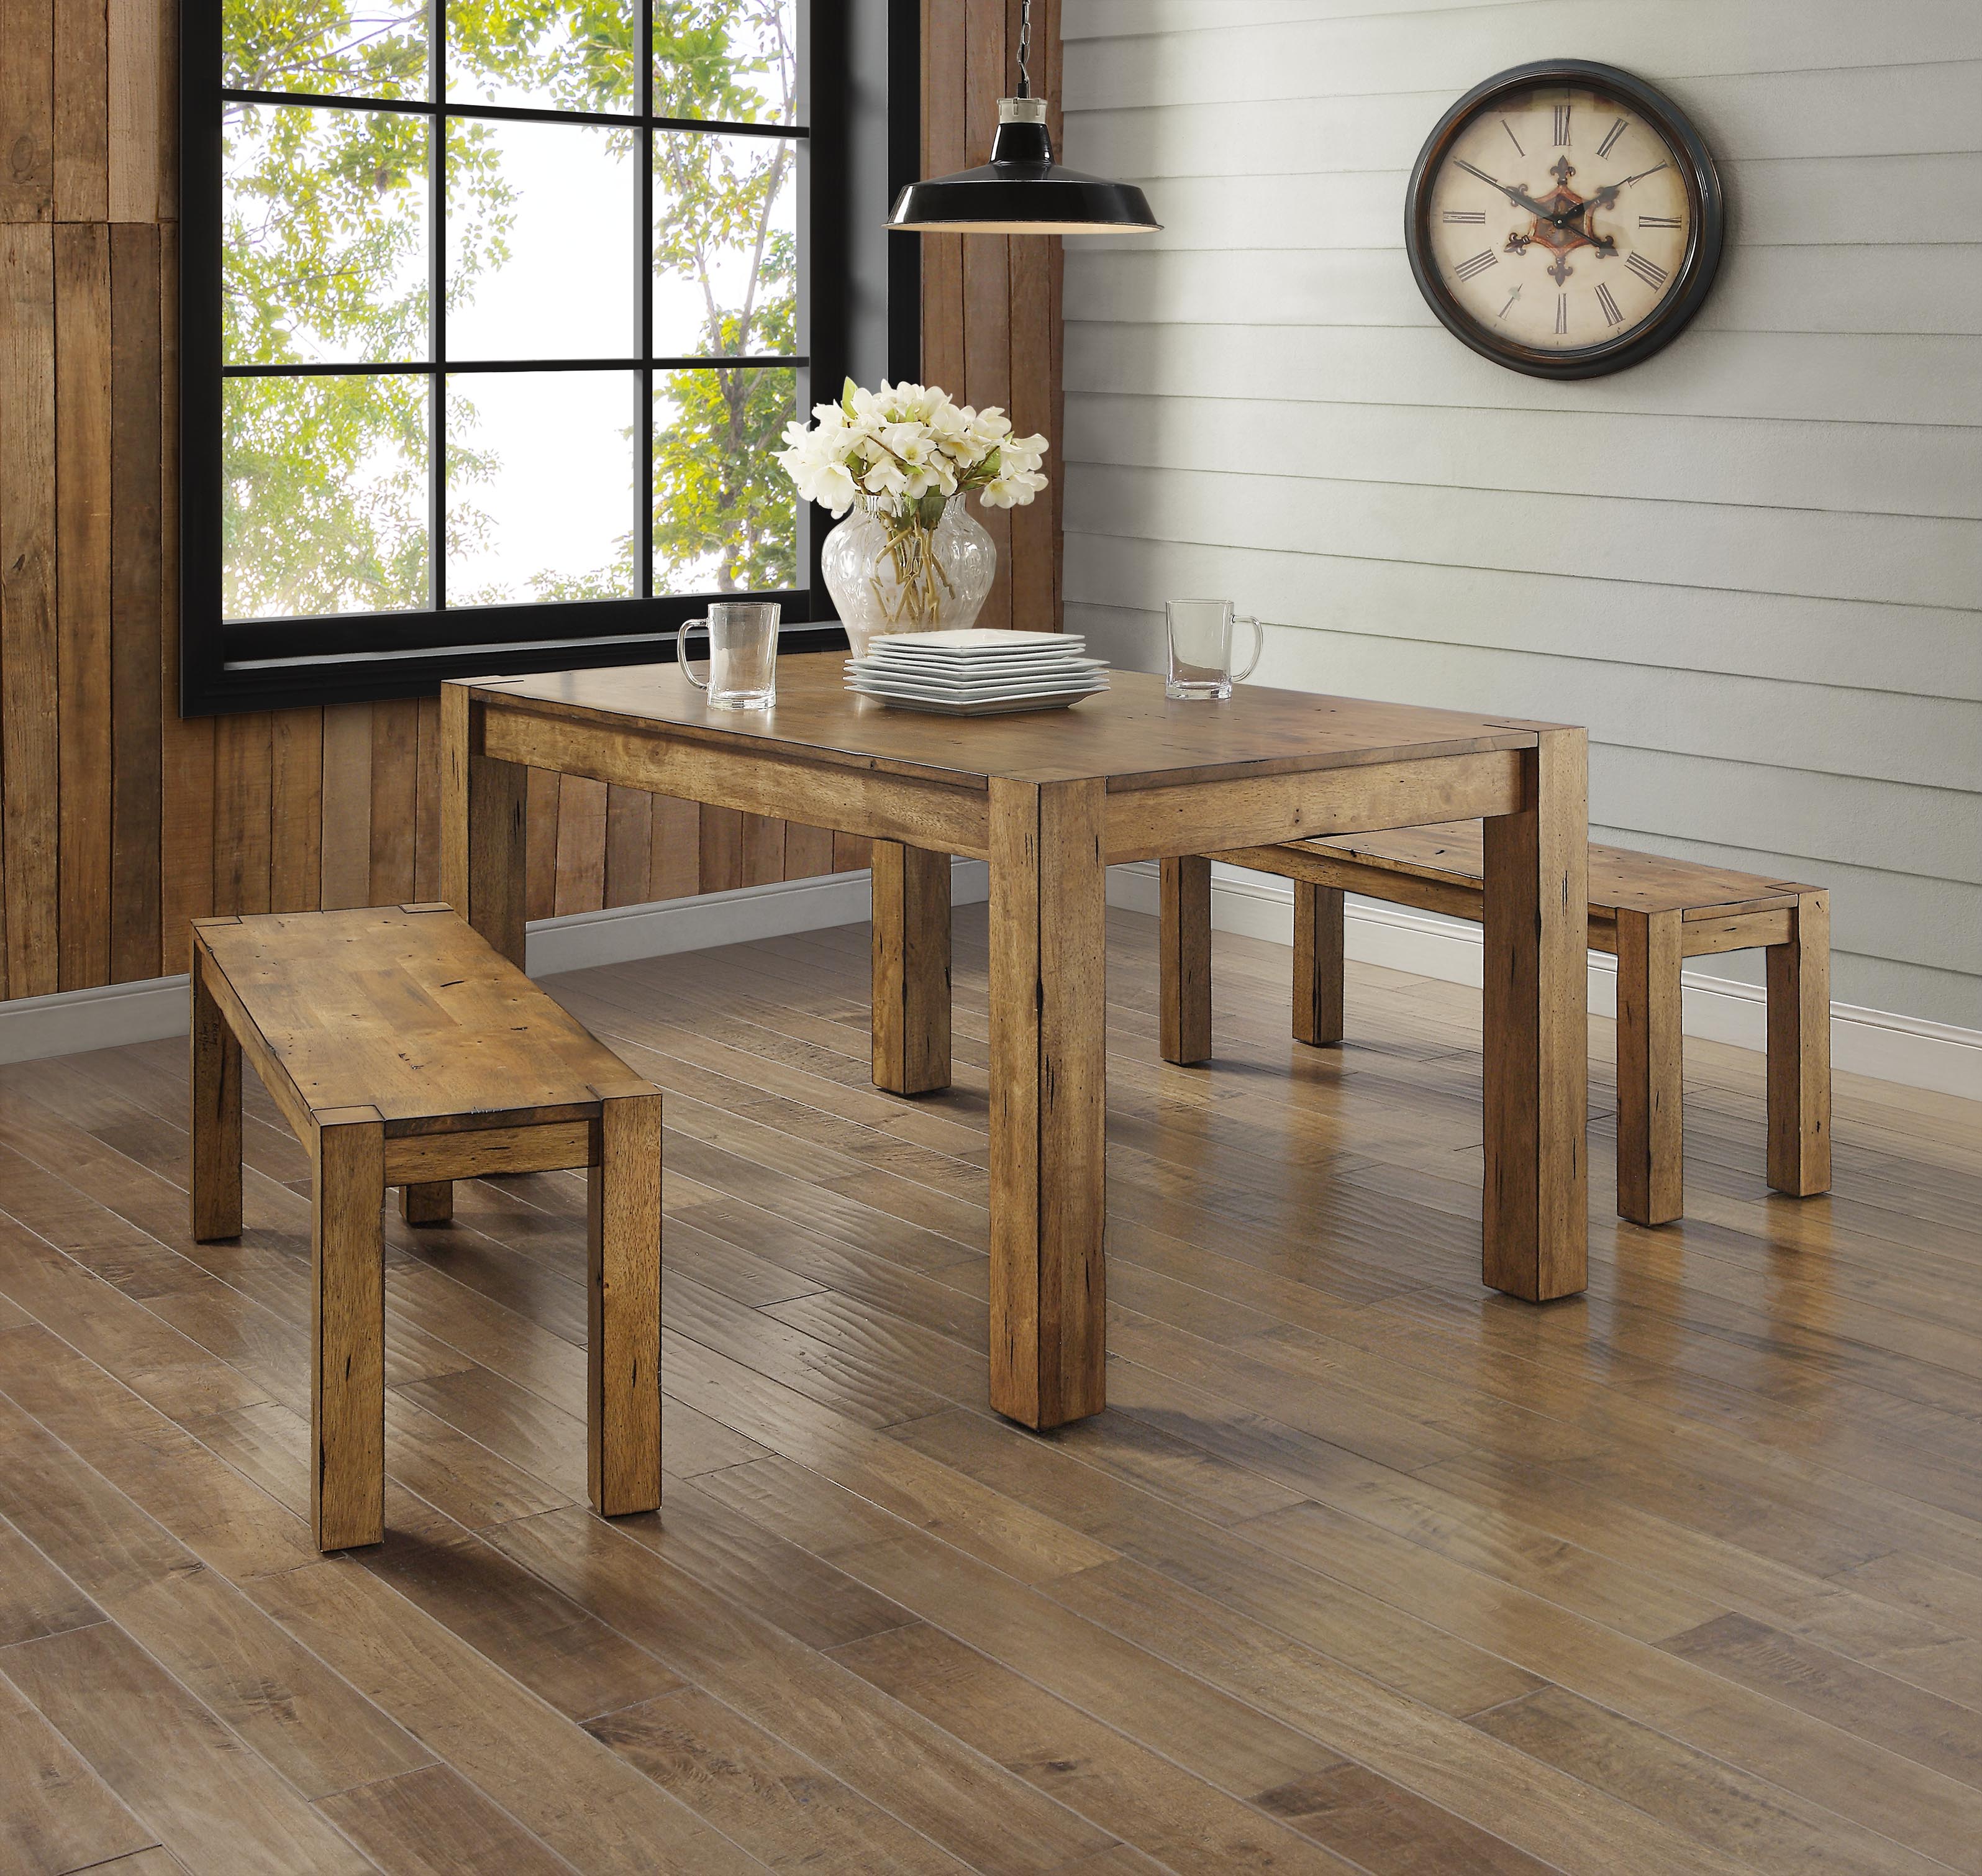 Better Homes & Gardens Bryant Solid Wood Dining Table, Rustic Brown - image 4 of 14